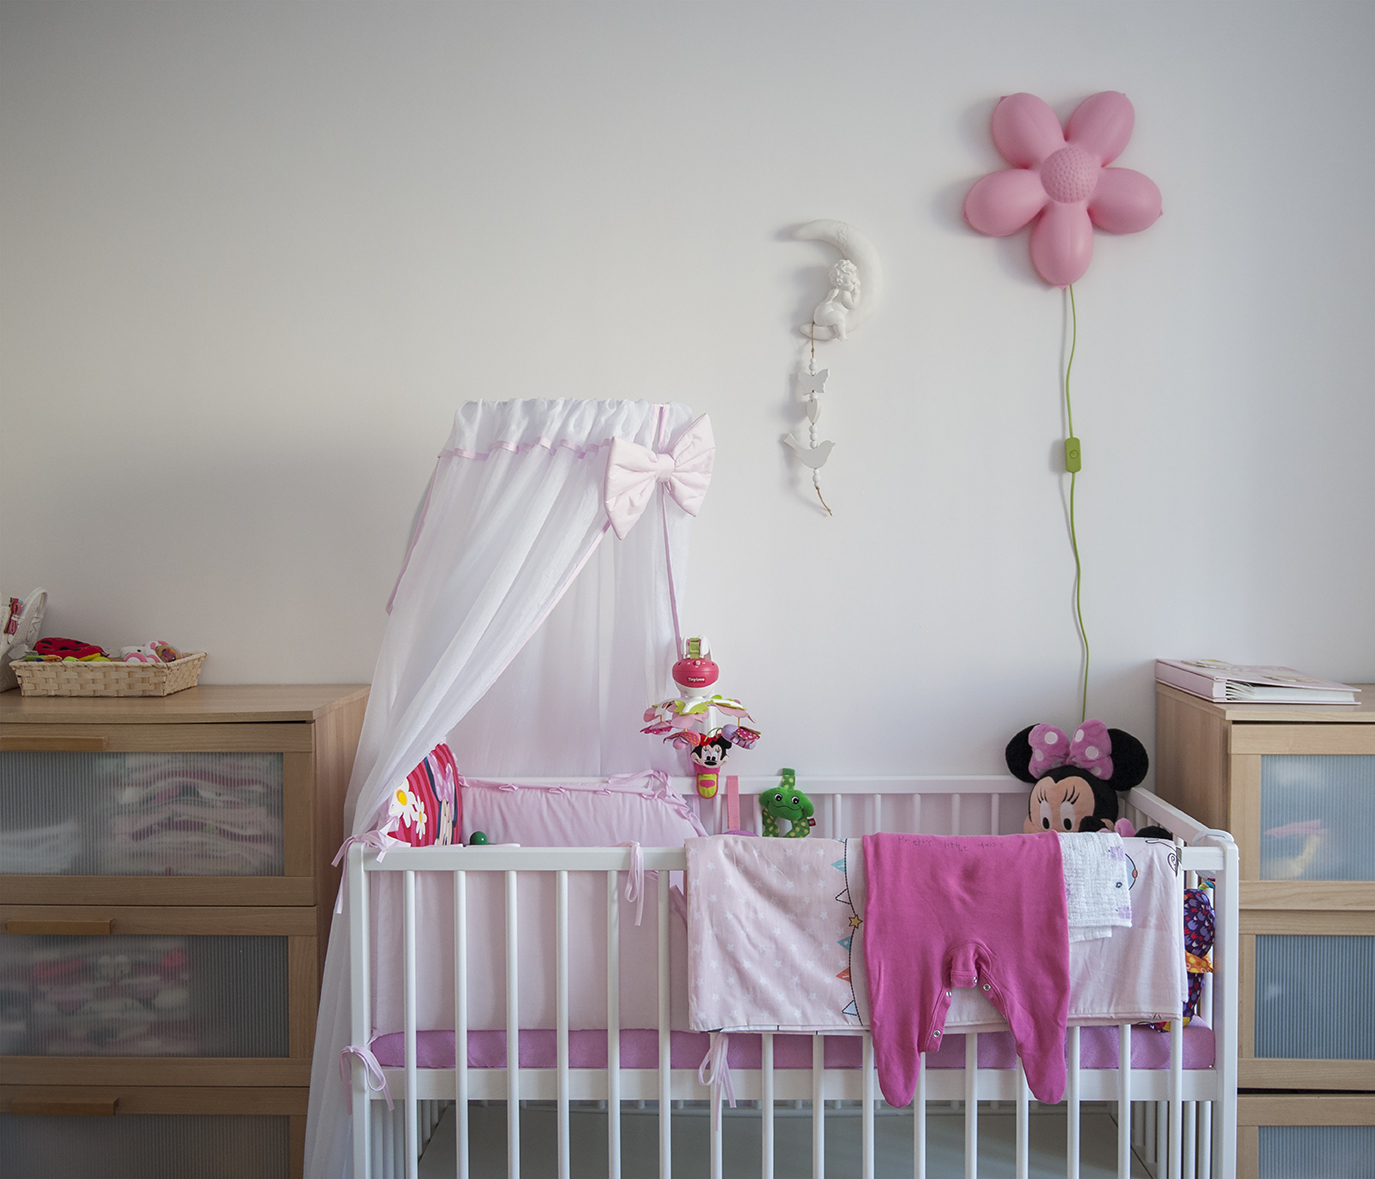  Lorcia’s room. Lorcia was part of the family for seven years because Magdalena could not conceive. A year ago she gave birth to a baby boy. The doll now safely stored in a cupboard is no longer needed - yet fulfilled her therapeutic purpose 